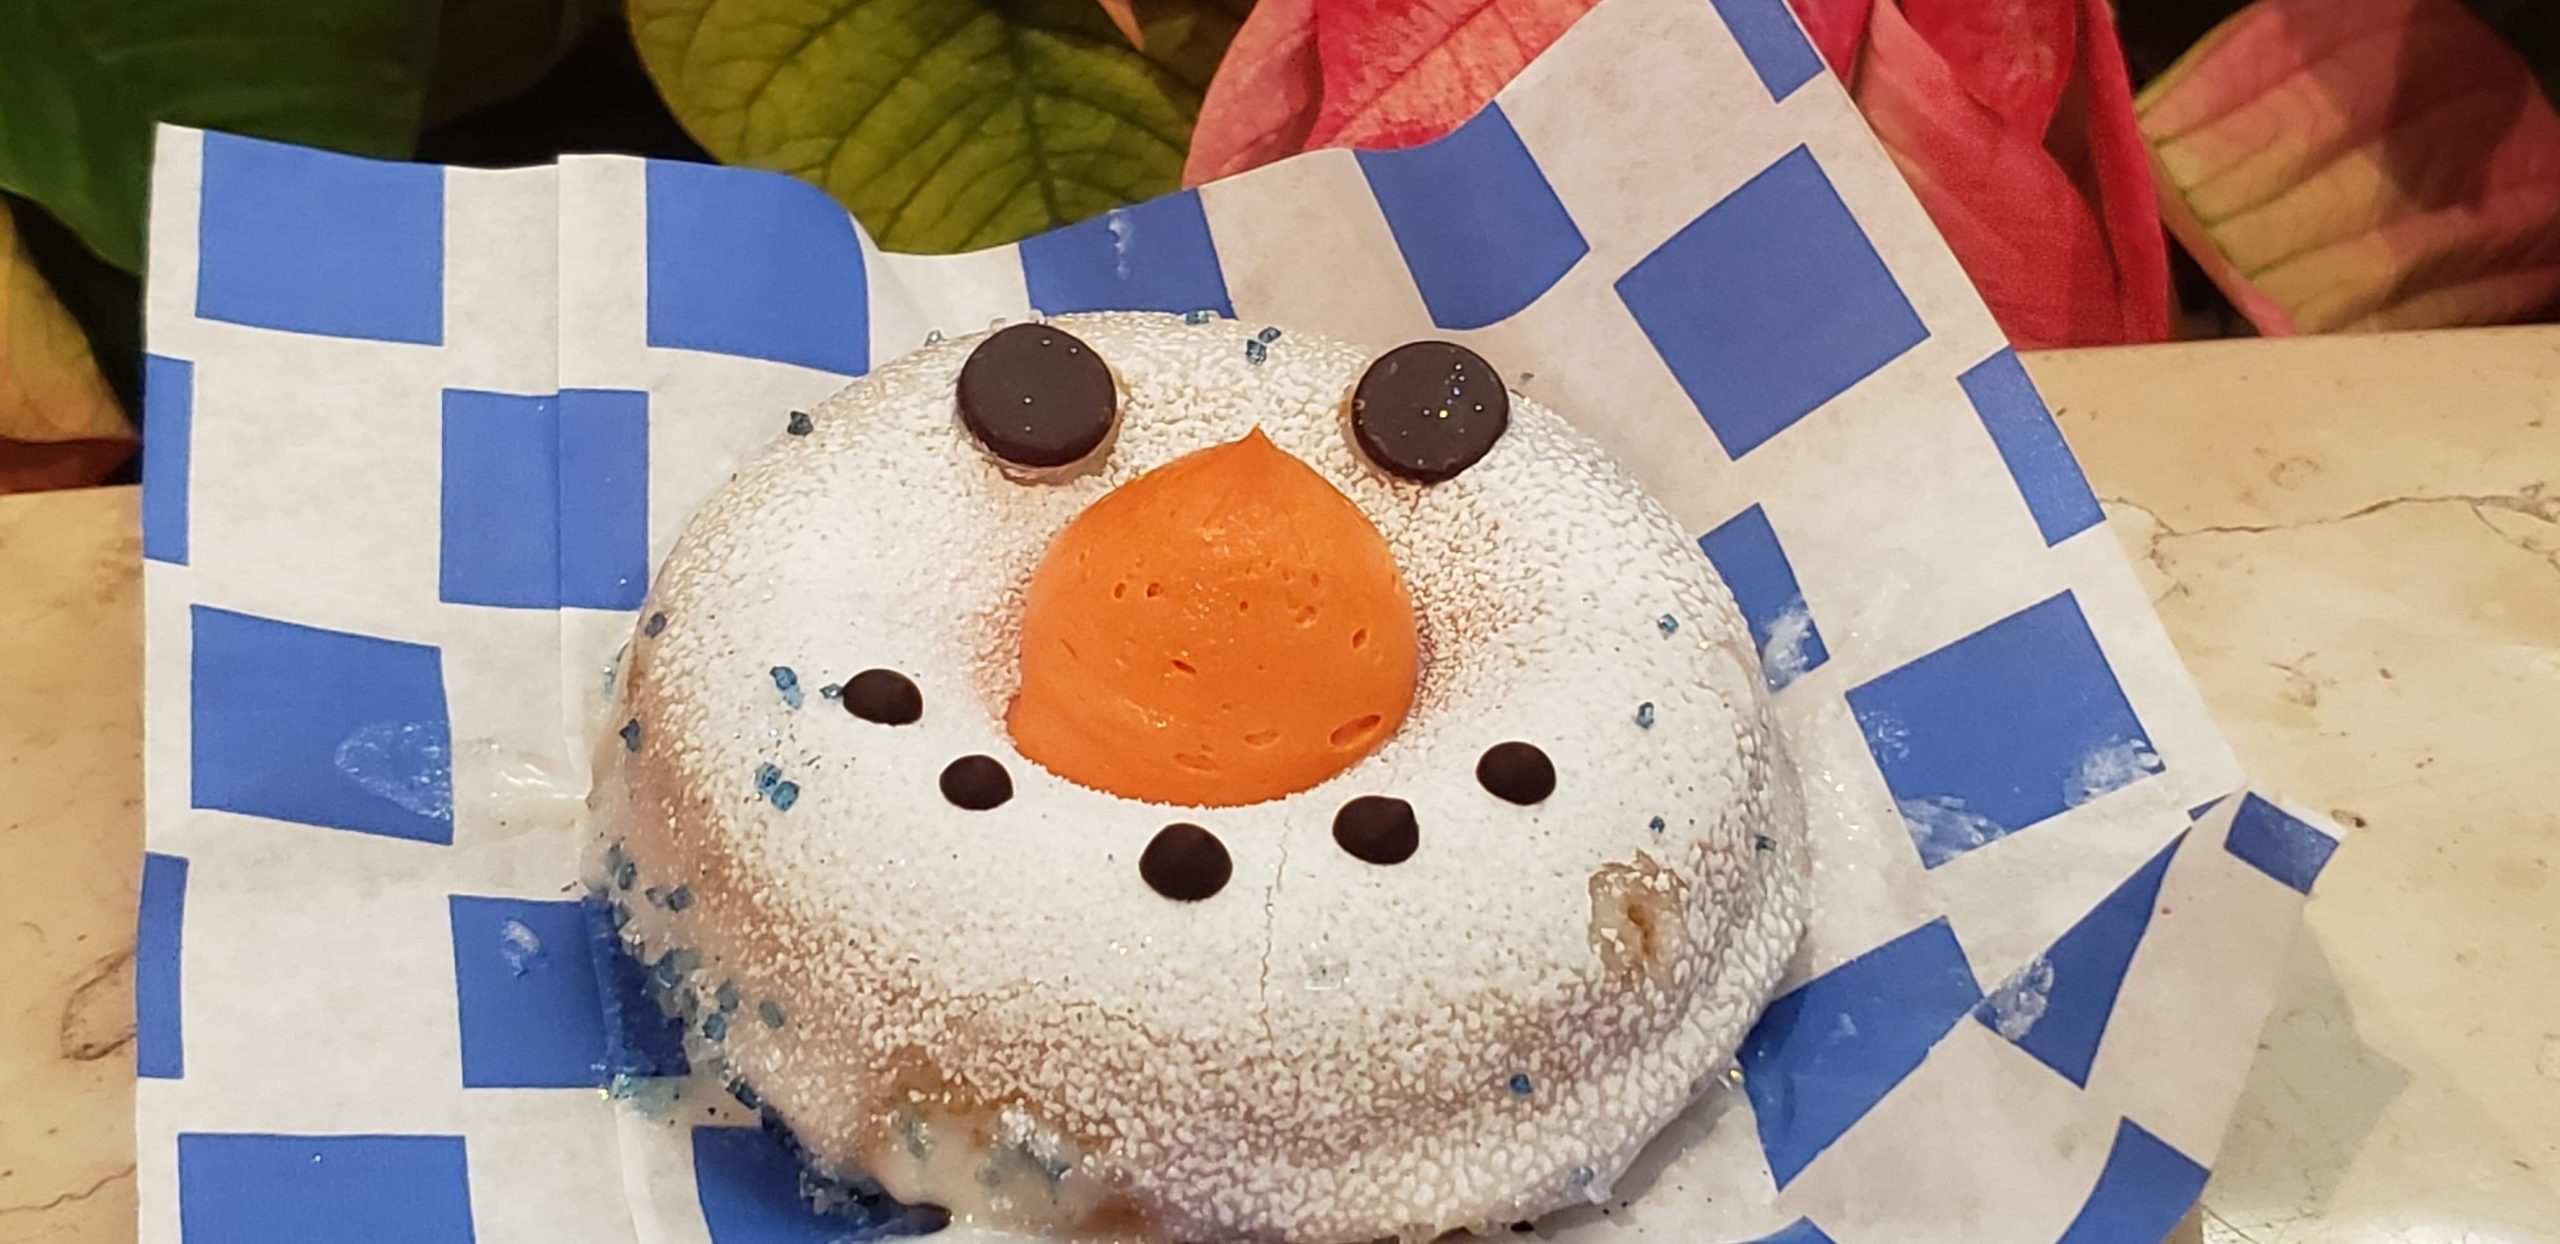 Do You Want To Eat A Snowman Donut?